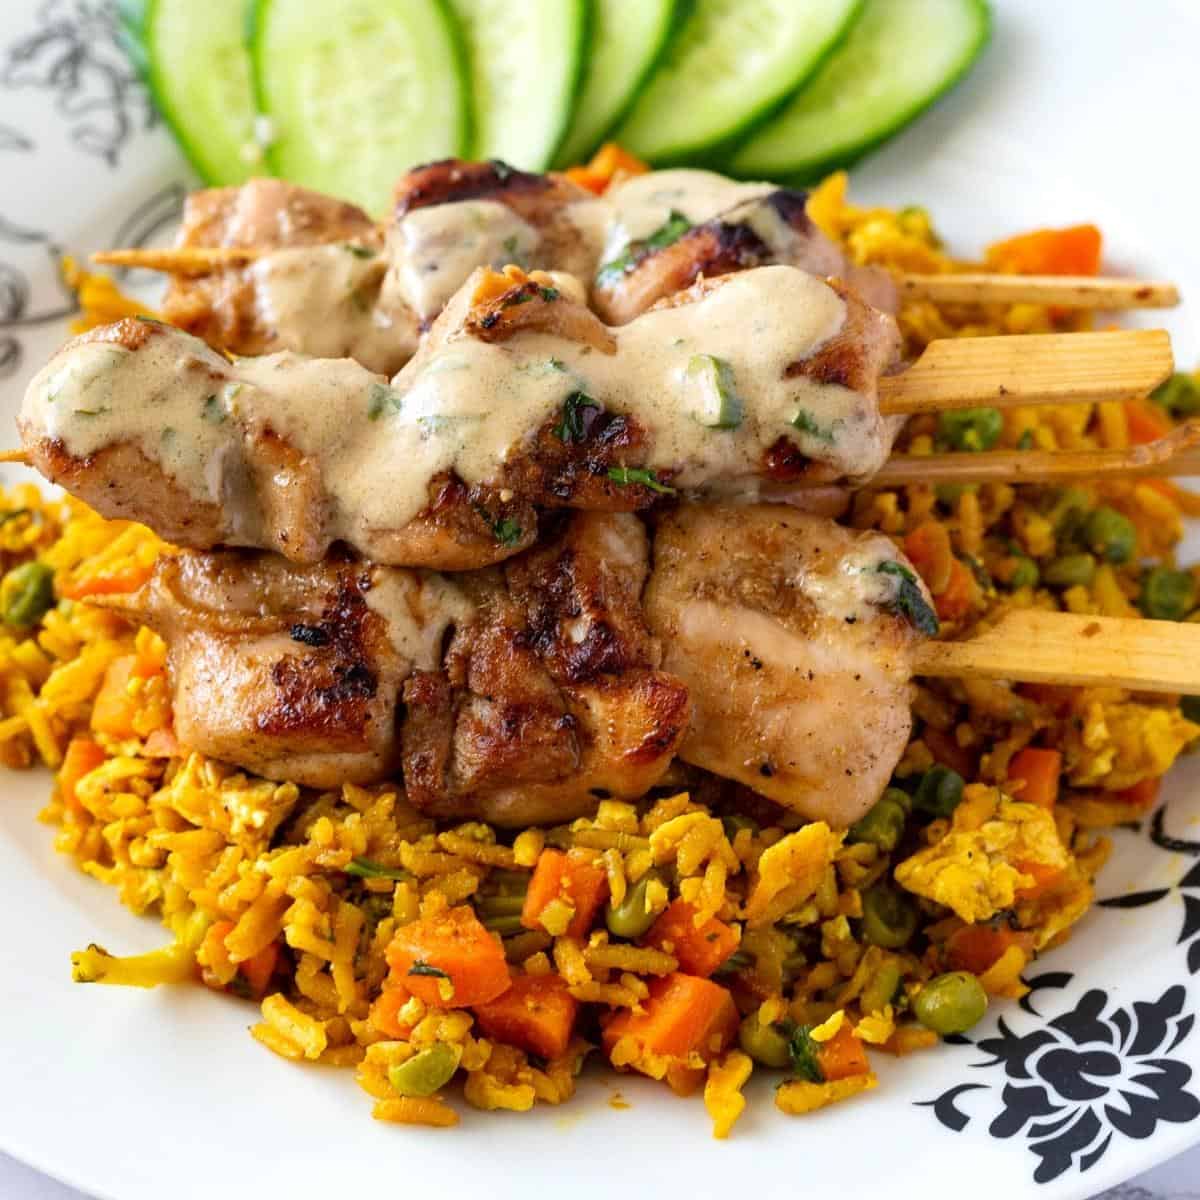 A platter with rice and chicken skewers.